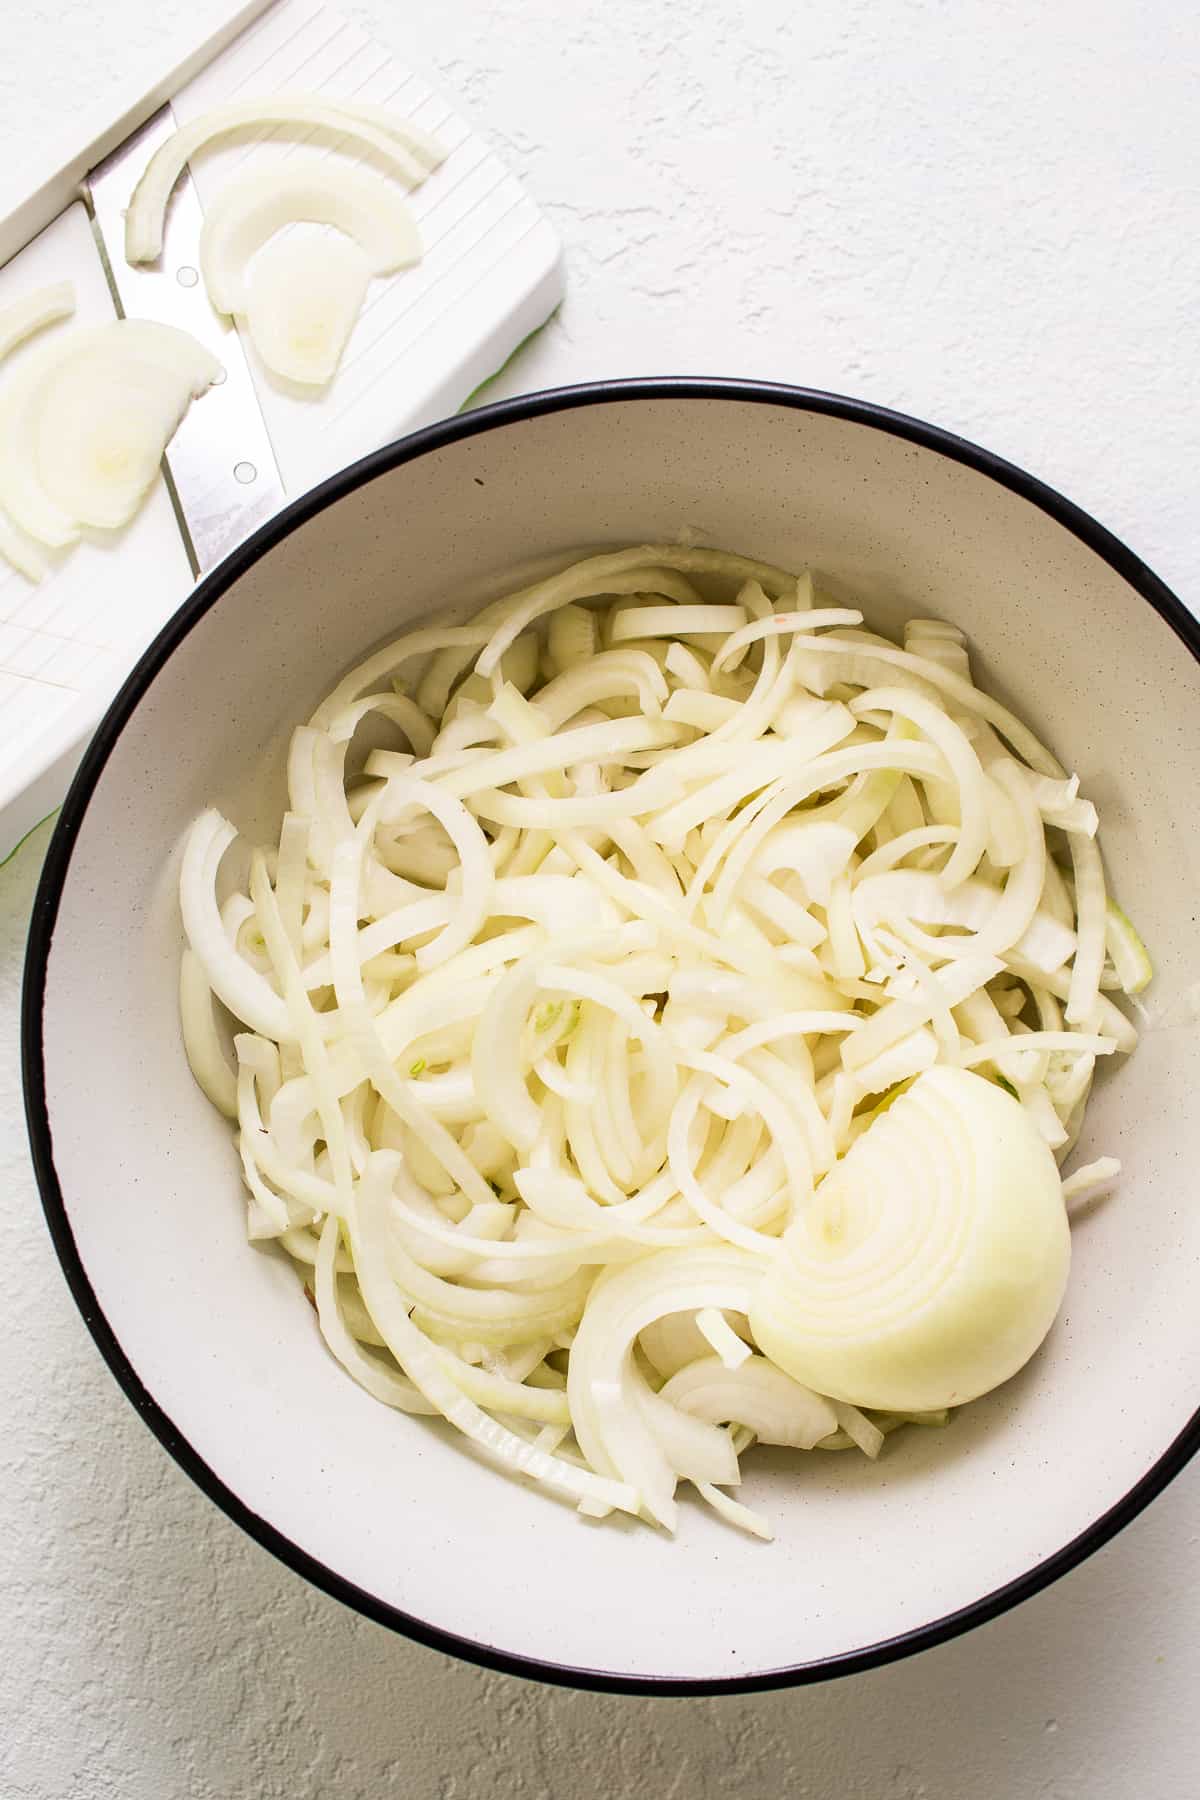 White onions in a bowl.